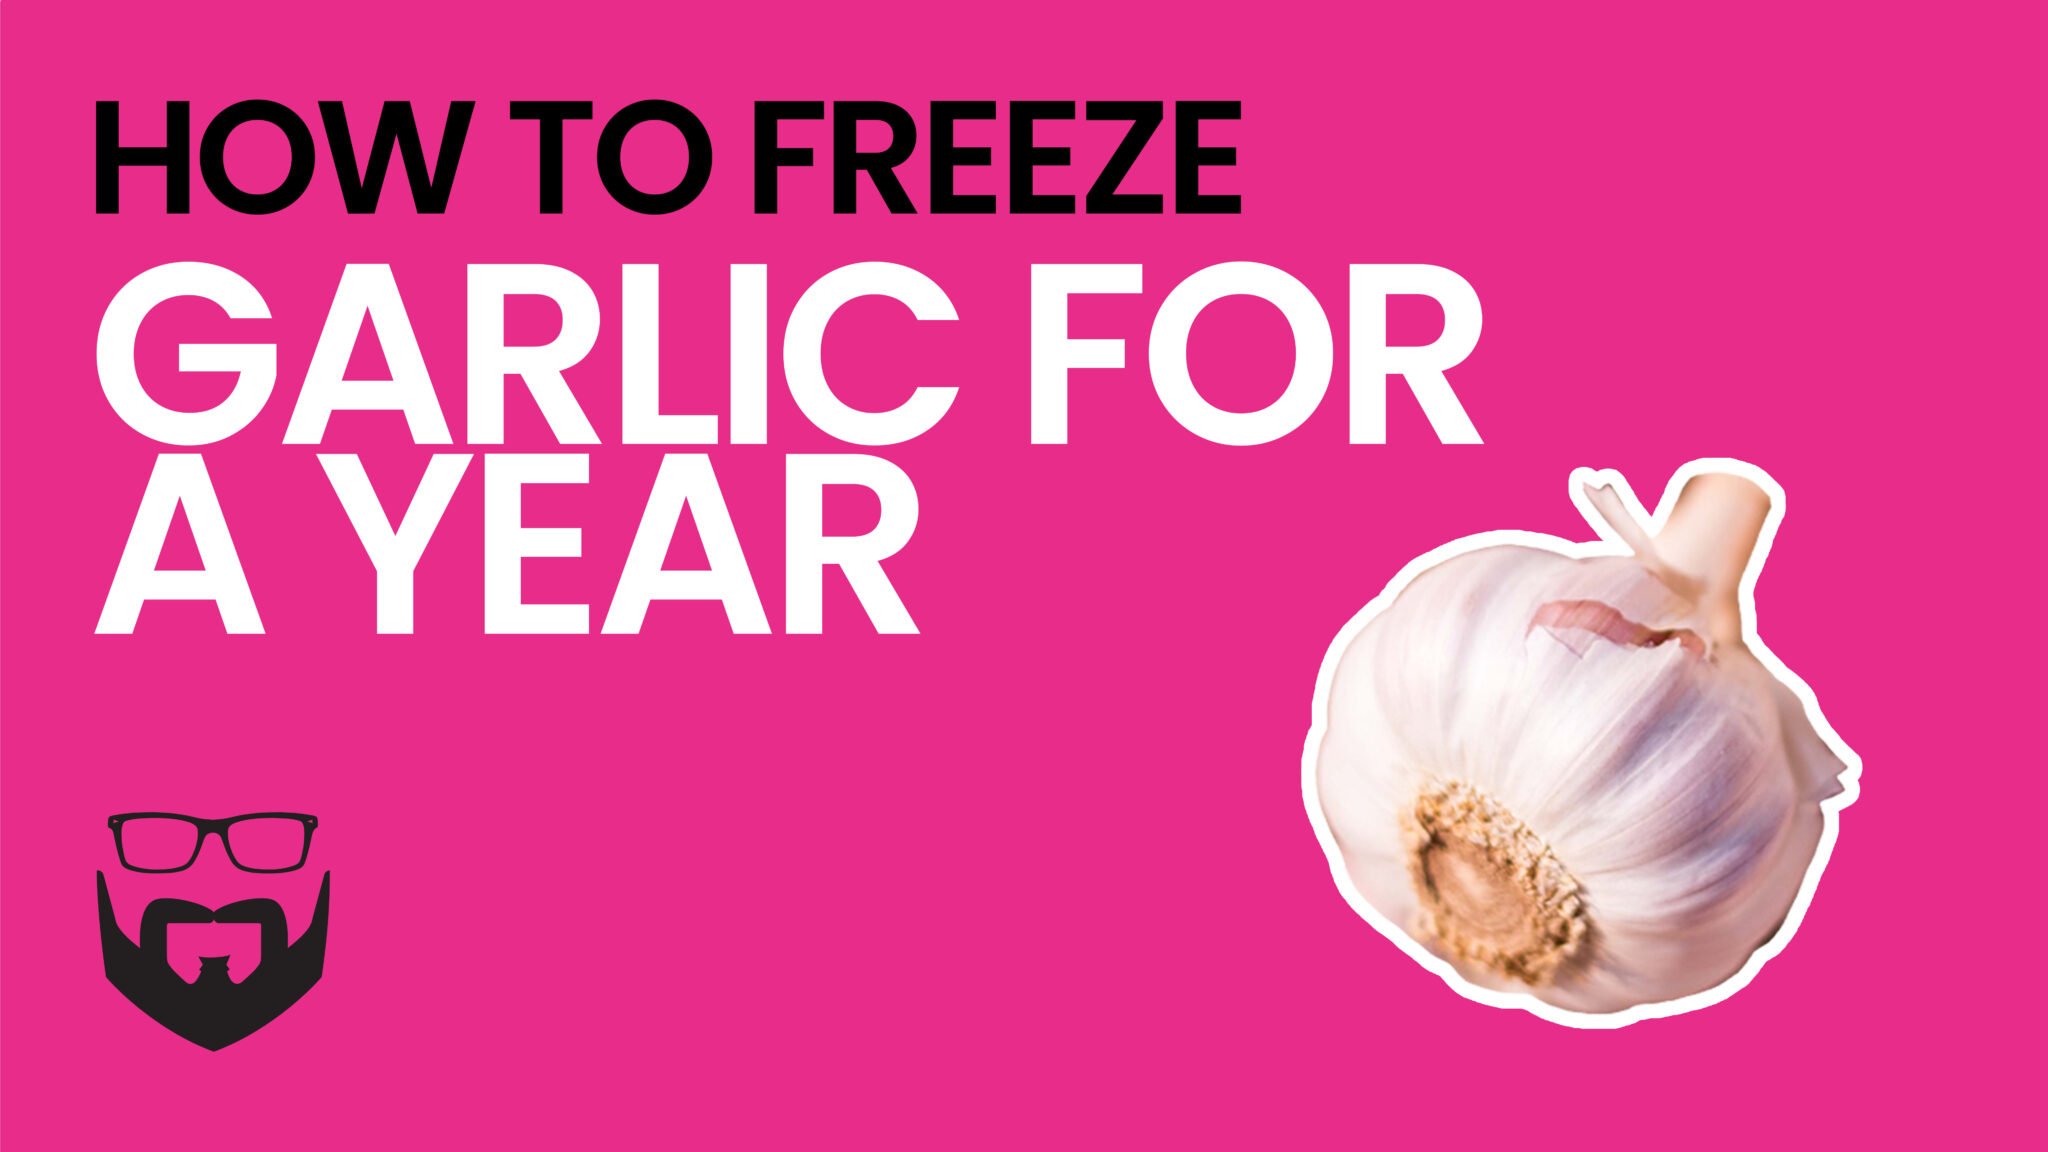 How to Freeze Garlic for a Year Video - Pink